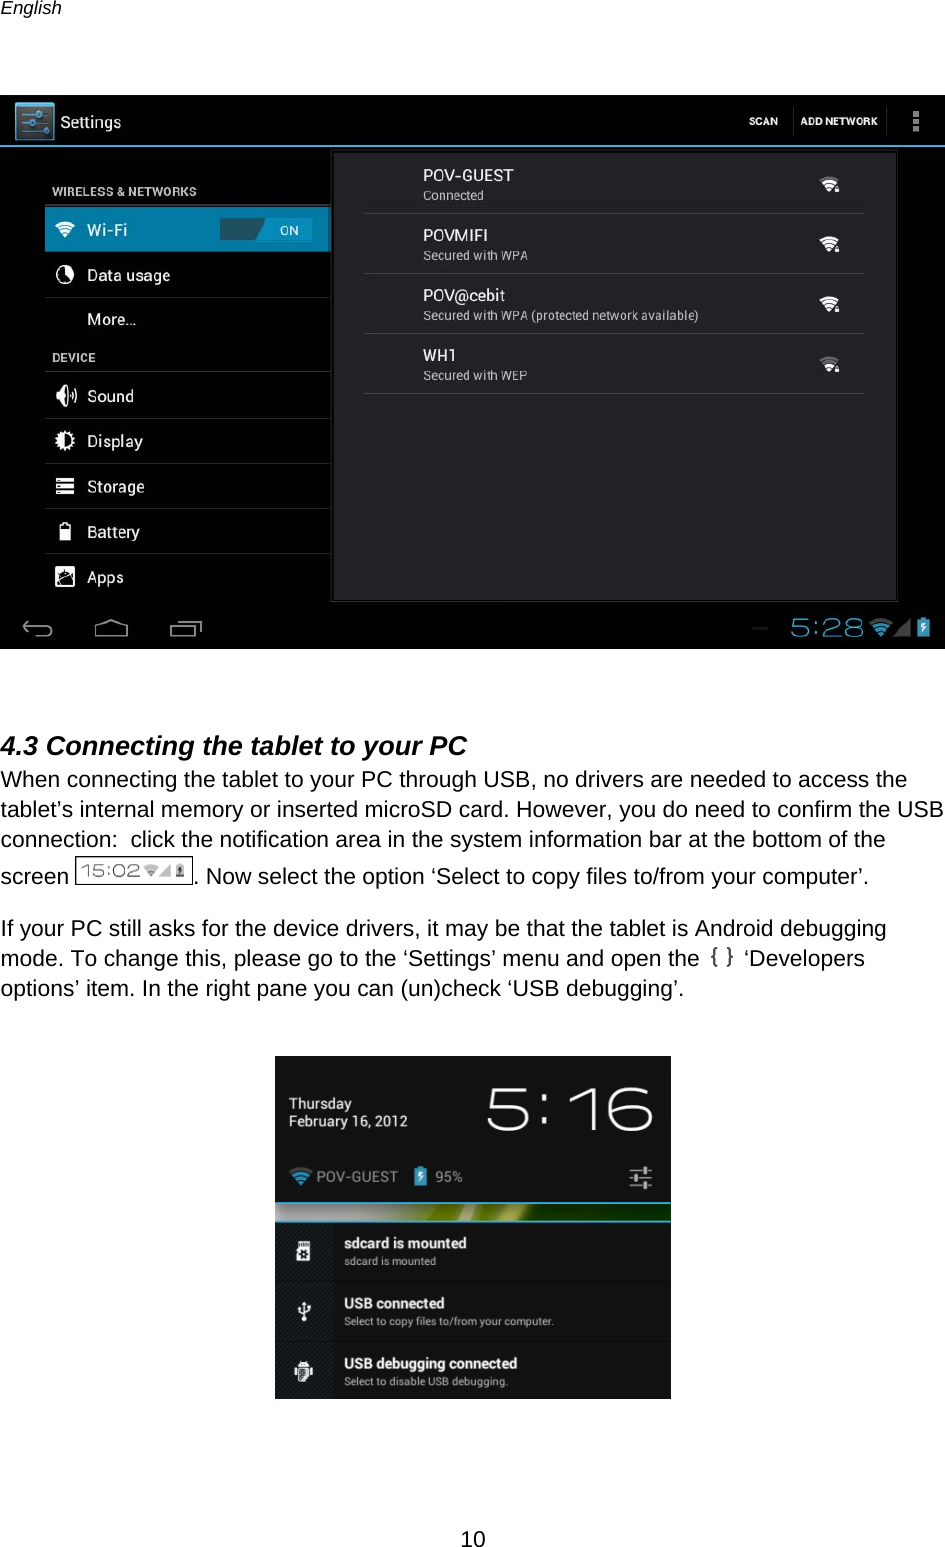 English      10    4.3 Connecting the tablet to your PC When connecting the tablet to your PC through USB, no drivers are needed to access the tablet’s internal memory or inserted microSD card. However, you do need to confirm the USB connection:  click the notification area in the system information bar at the bottom of the screen  . Now select the option ‘Select to copy files to/from your computer’. If your PC still asks for the device drivers, it may be that the tablet is Android debugging mode. To change this, please go to the ‘Settings’ menu and open the   ‘Developers options’ item. In the right pane you can (un)check ‘USB debugging’.   